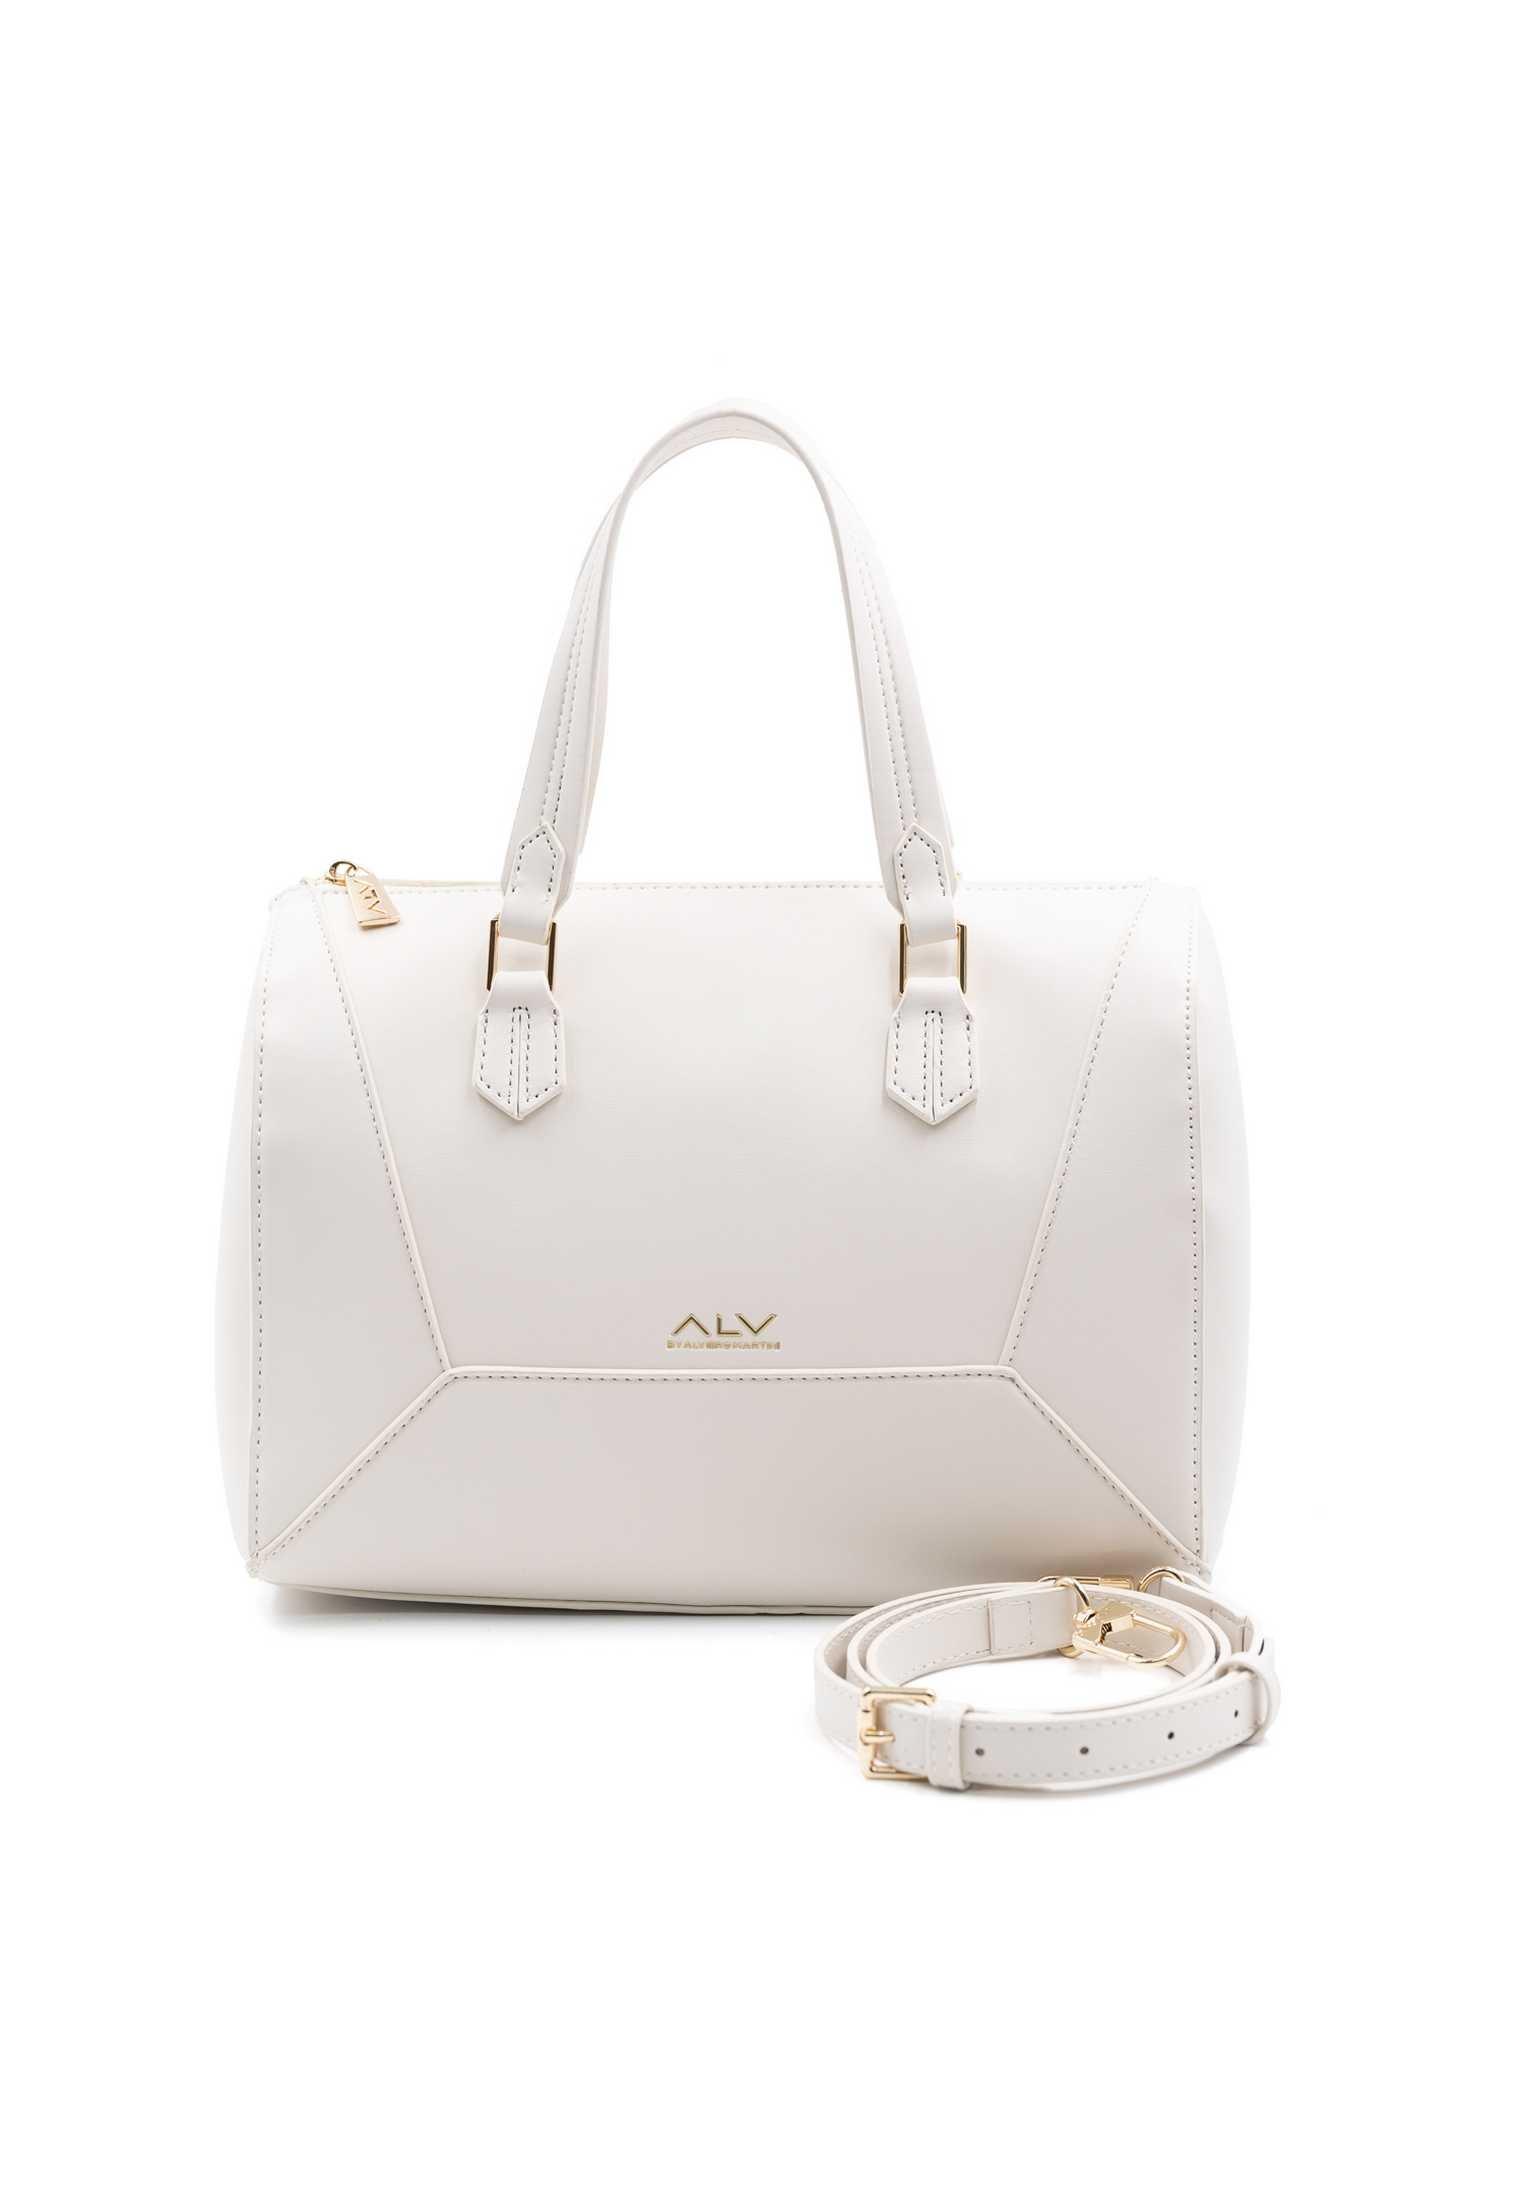 Image of ALV by Alviero Martini Bowling Bag Gemini Collection Audrey Alv By Alviero Martini Handtasche - ONE SIZE